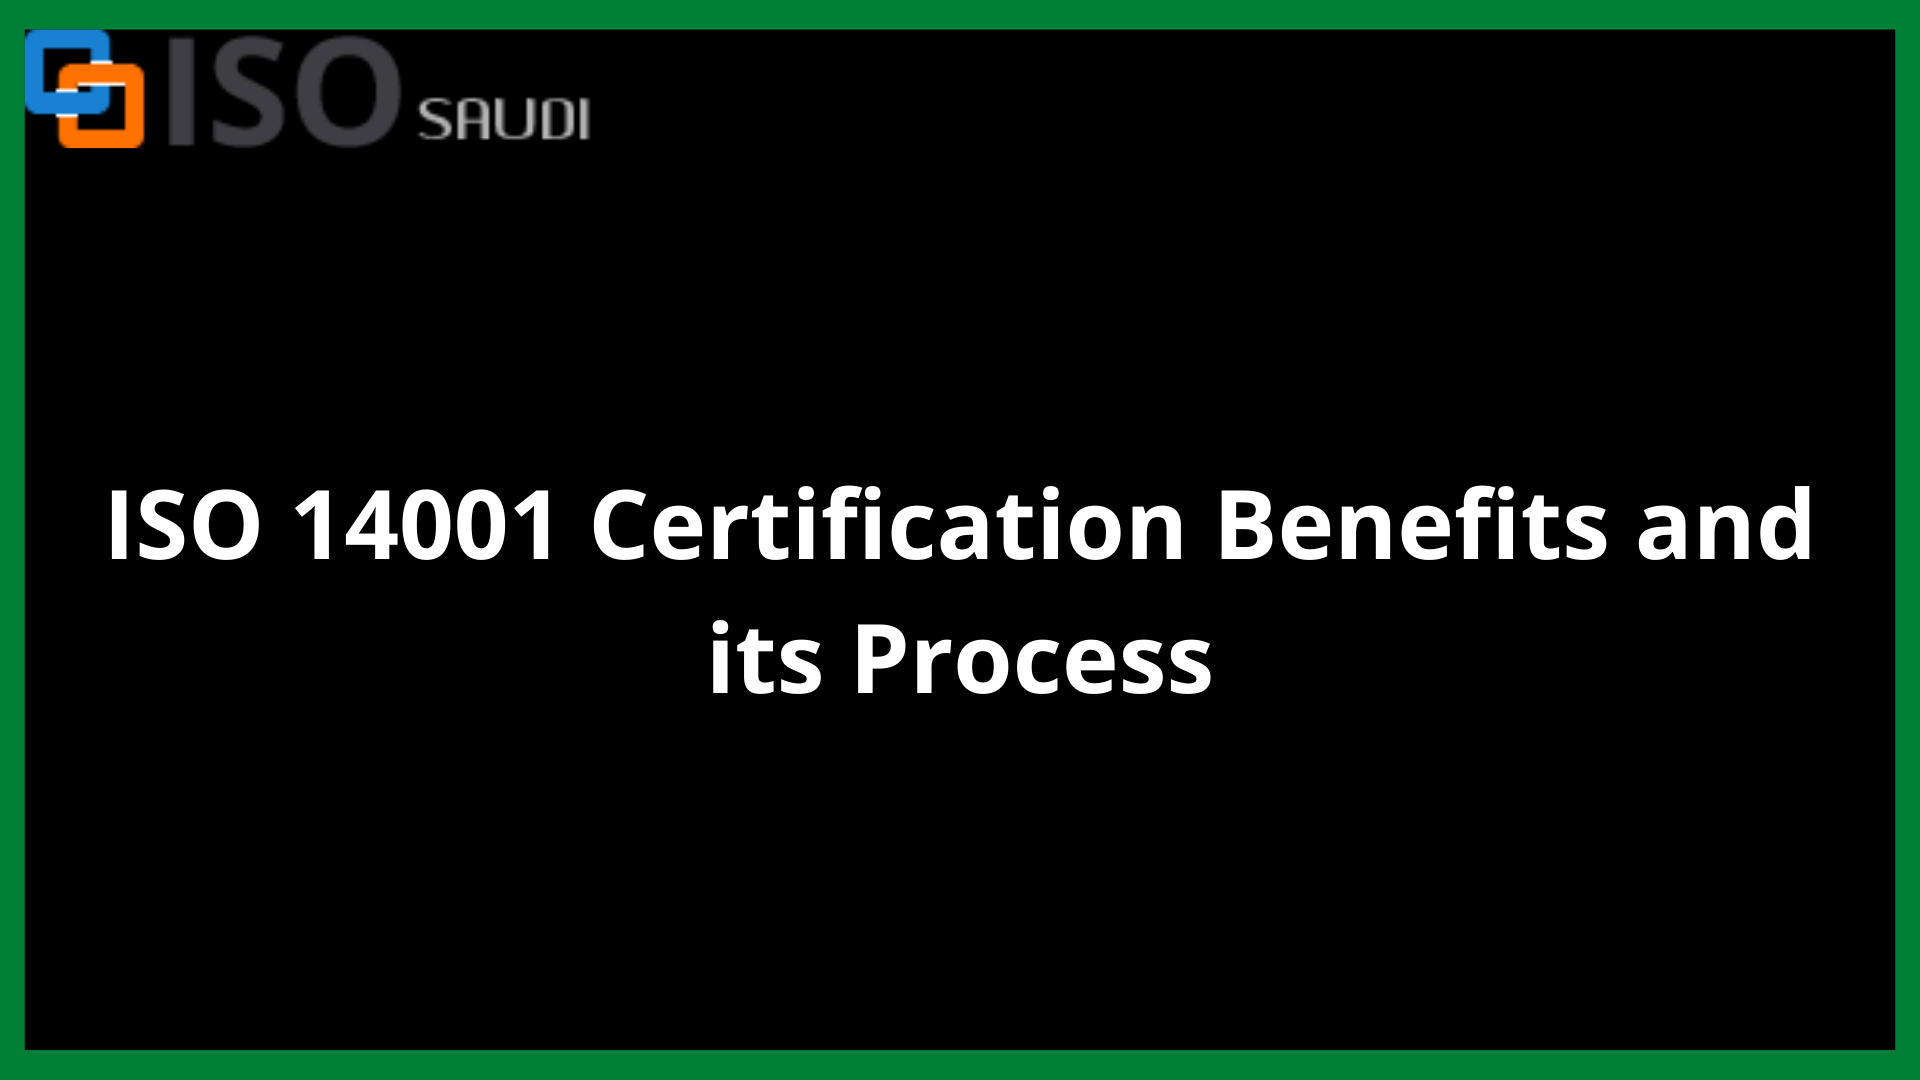 ISO 14001 Certification Benefits and its Process